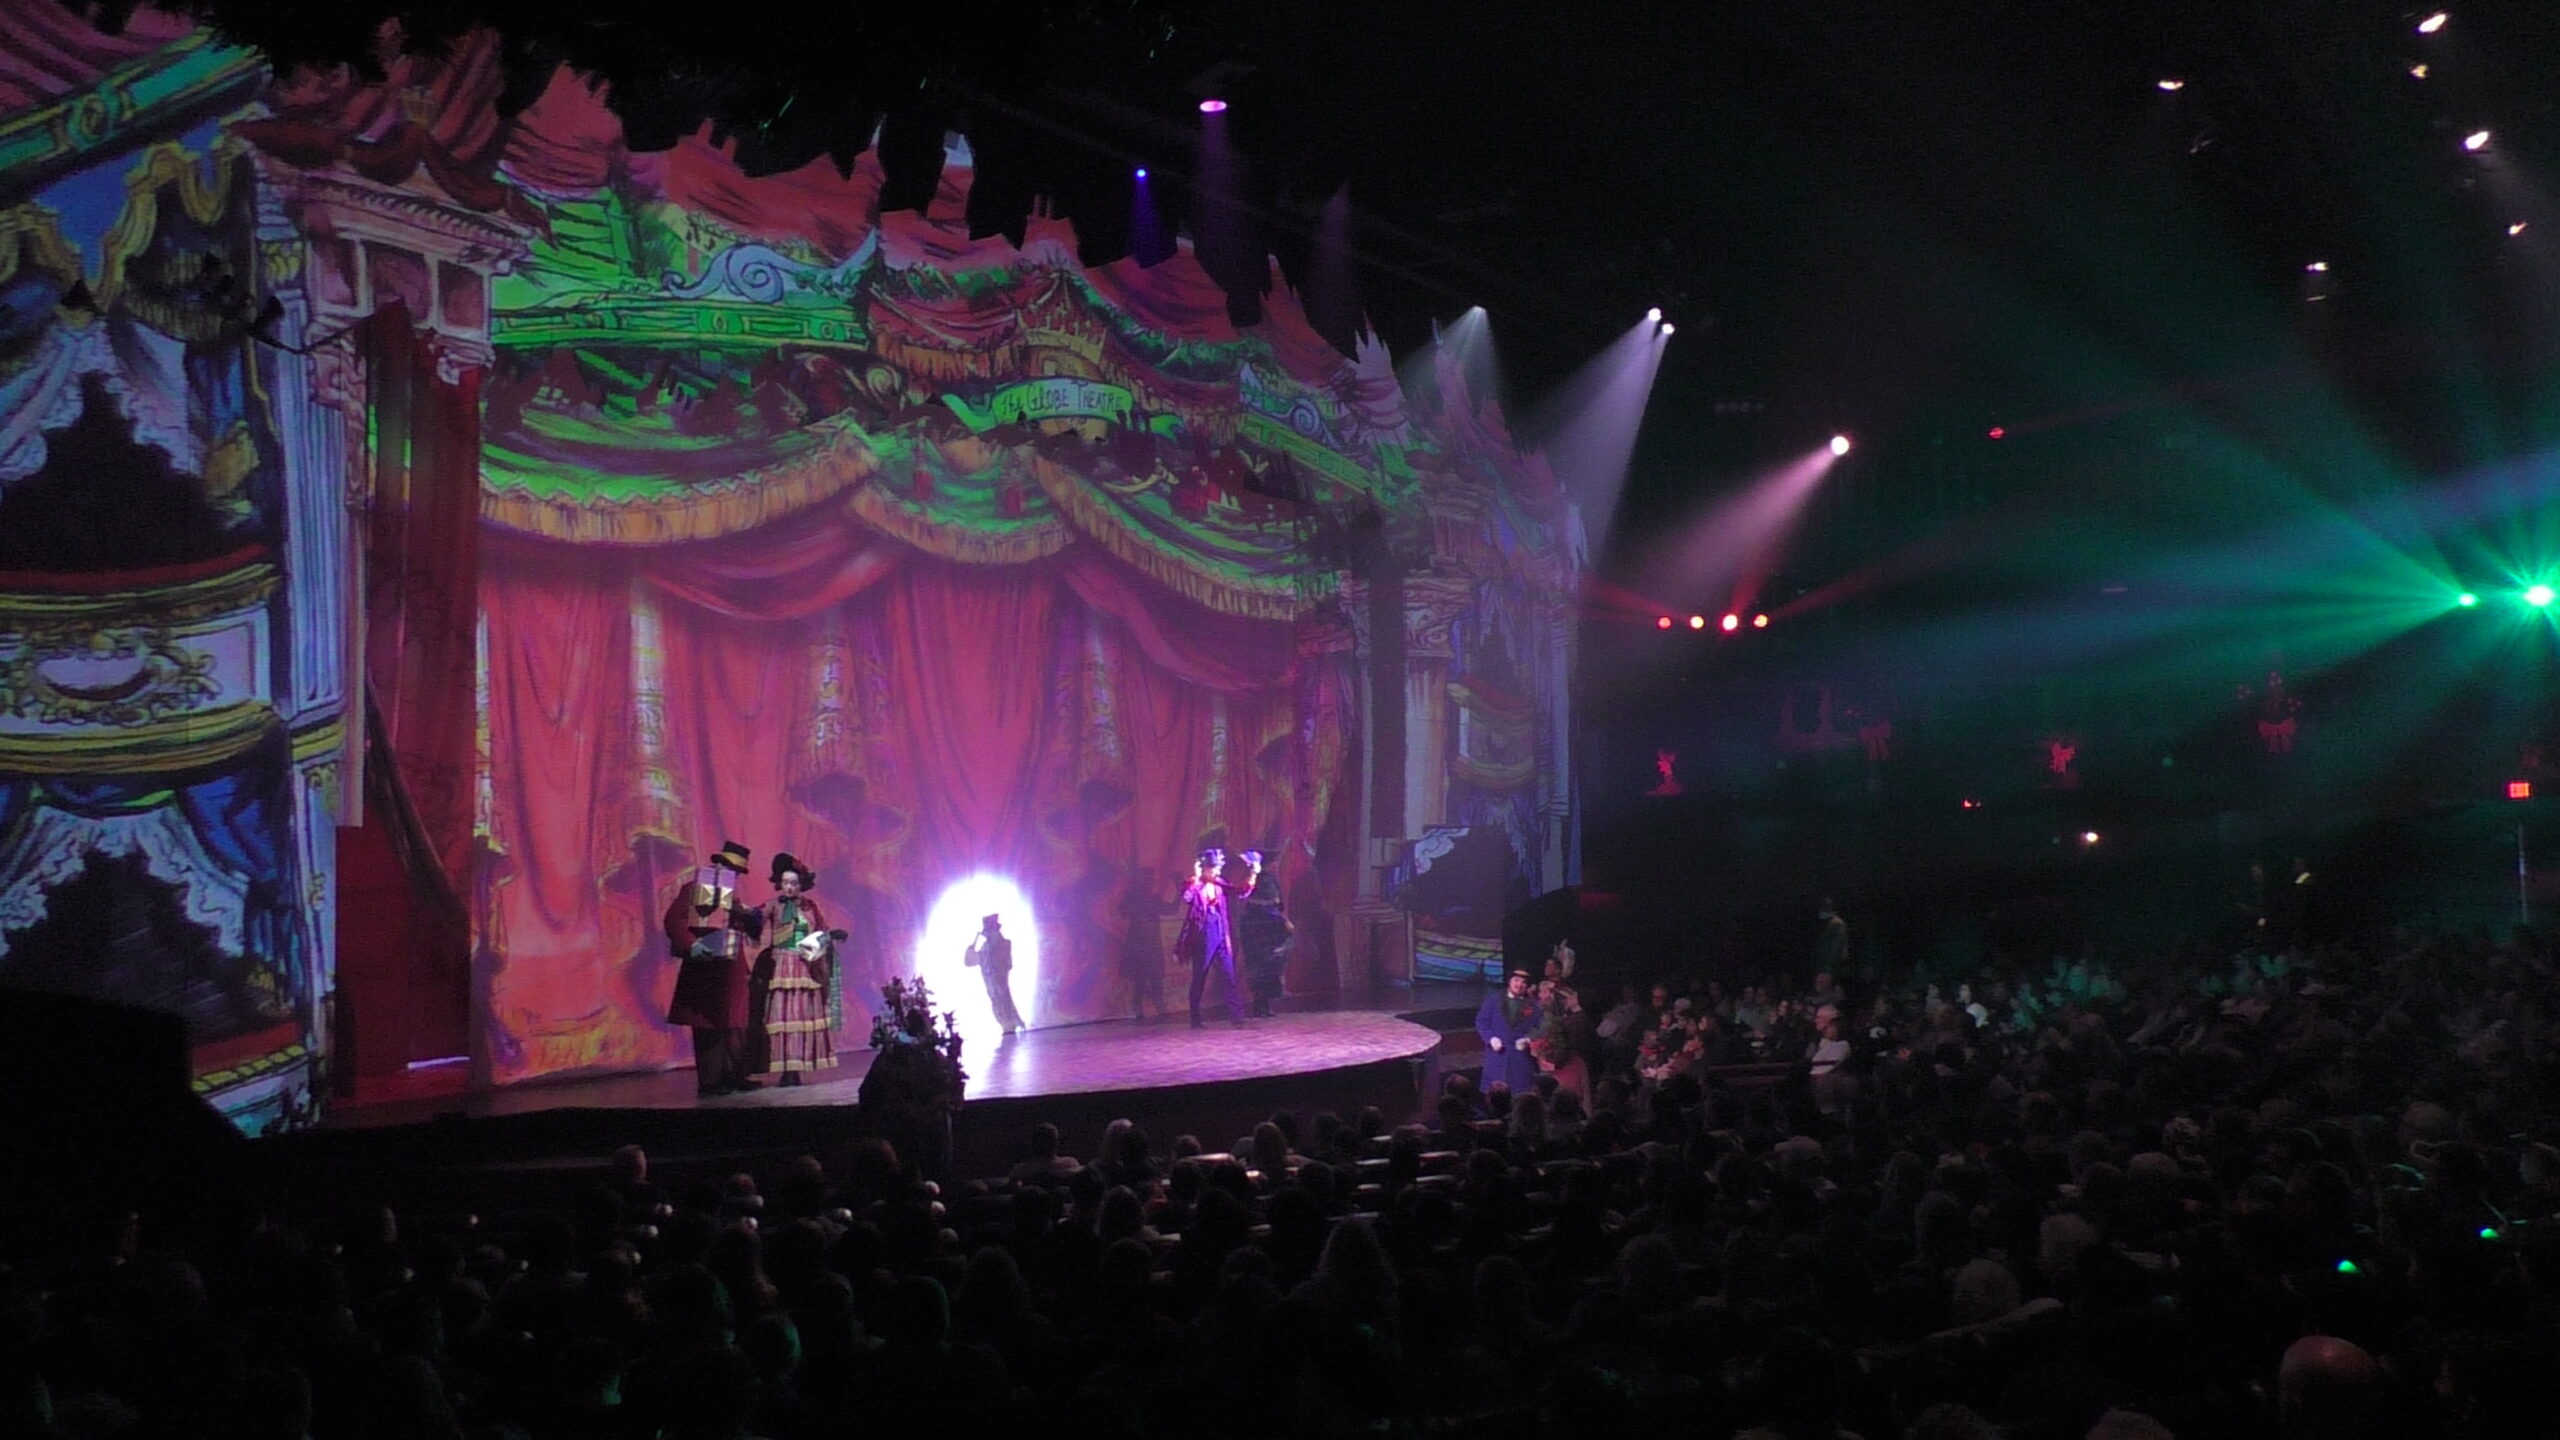 Finish your day with Musical Shows that will delight everyone!